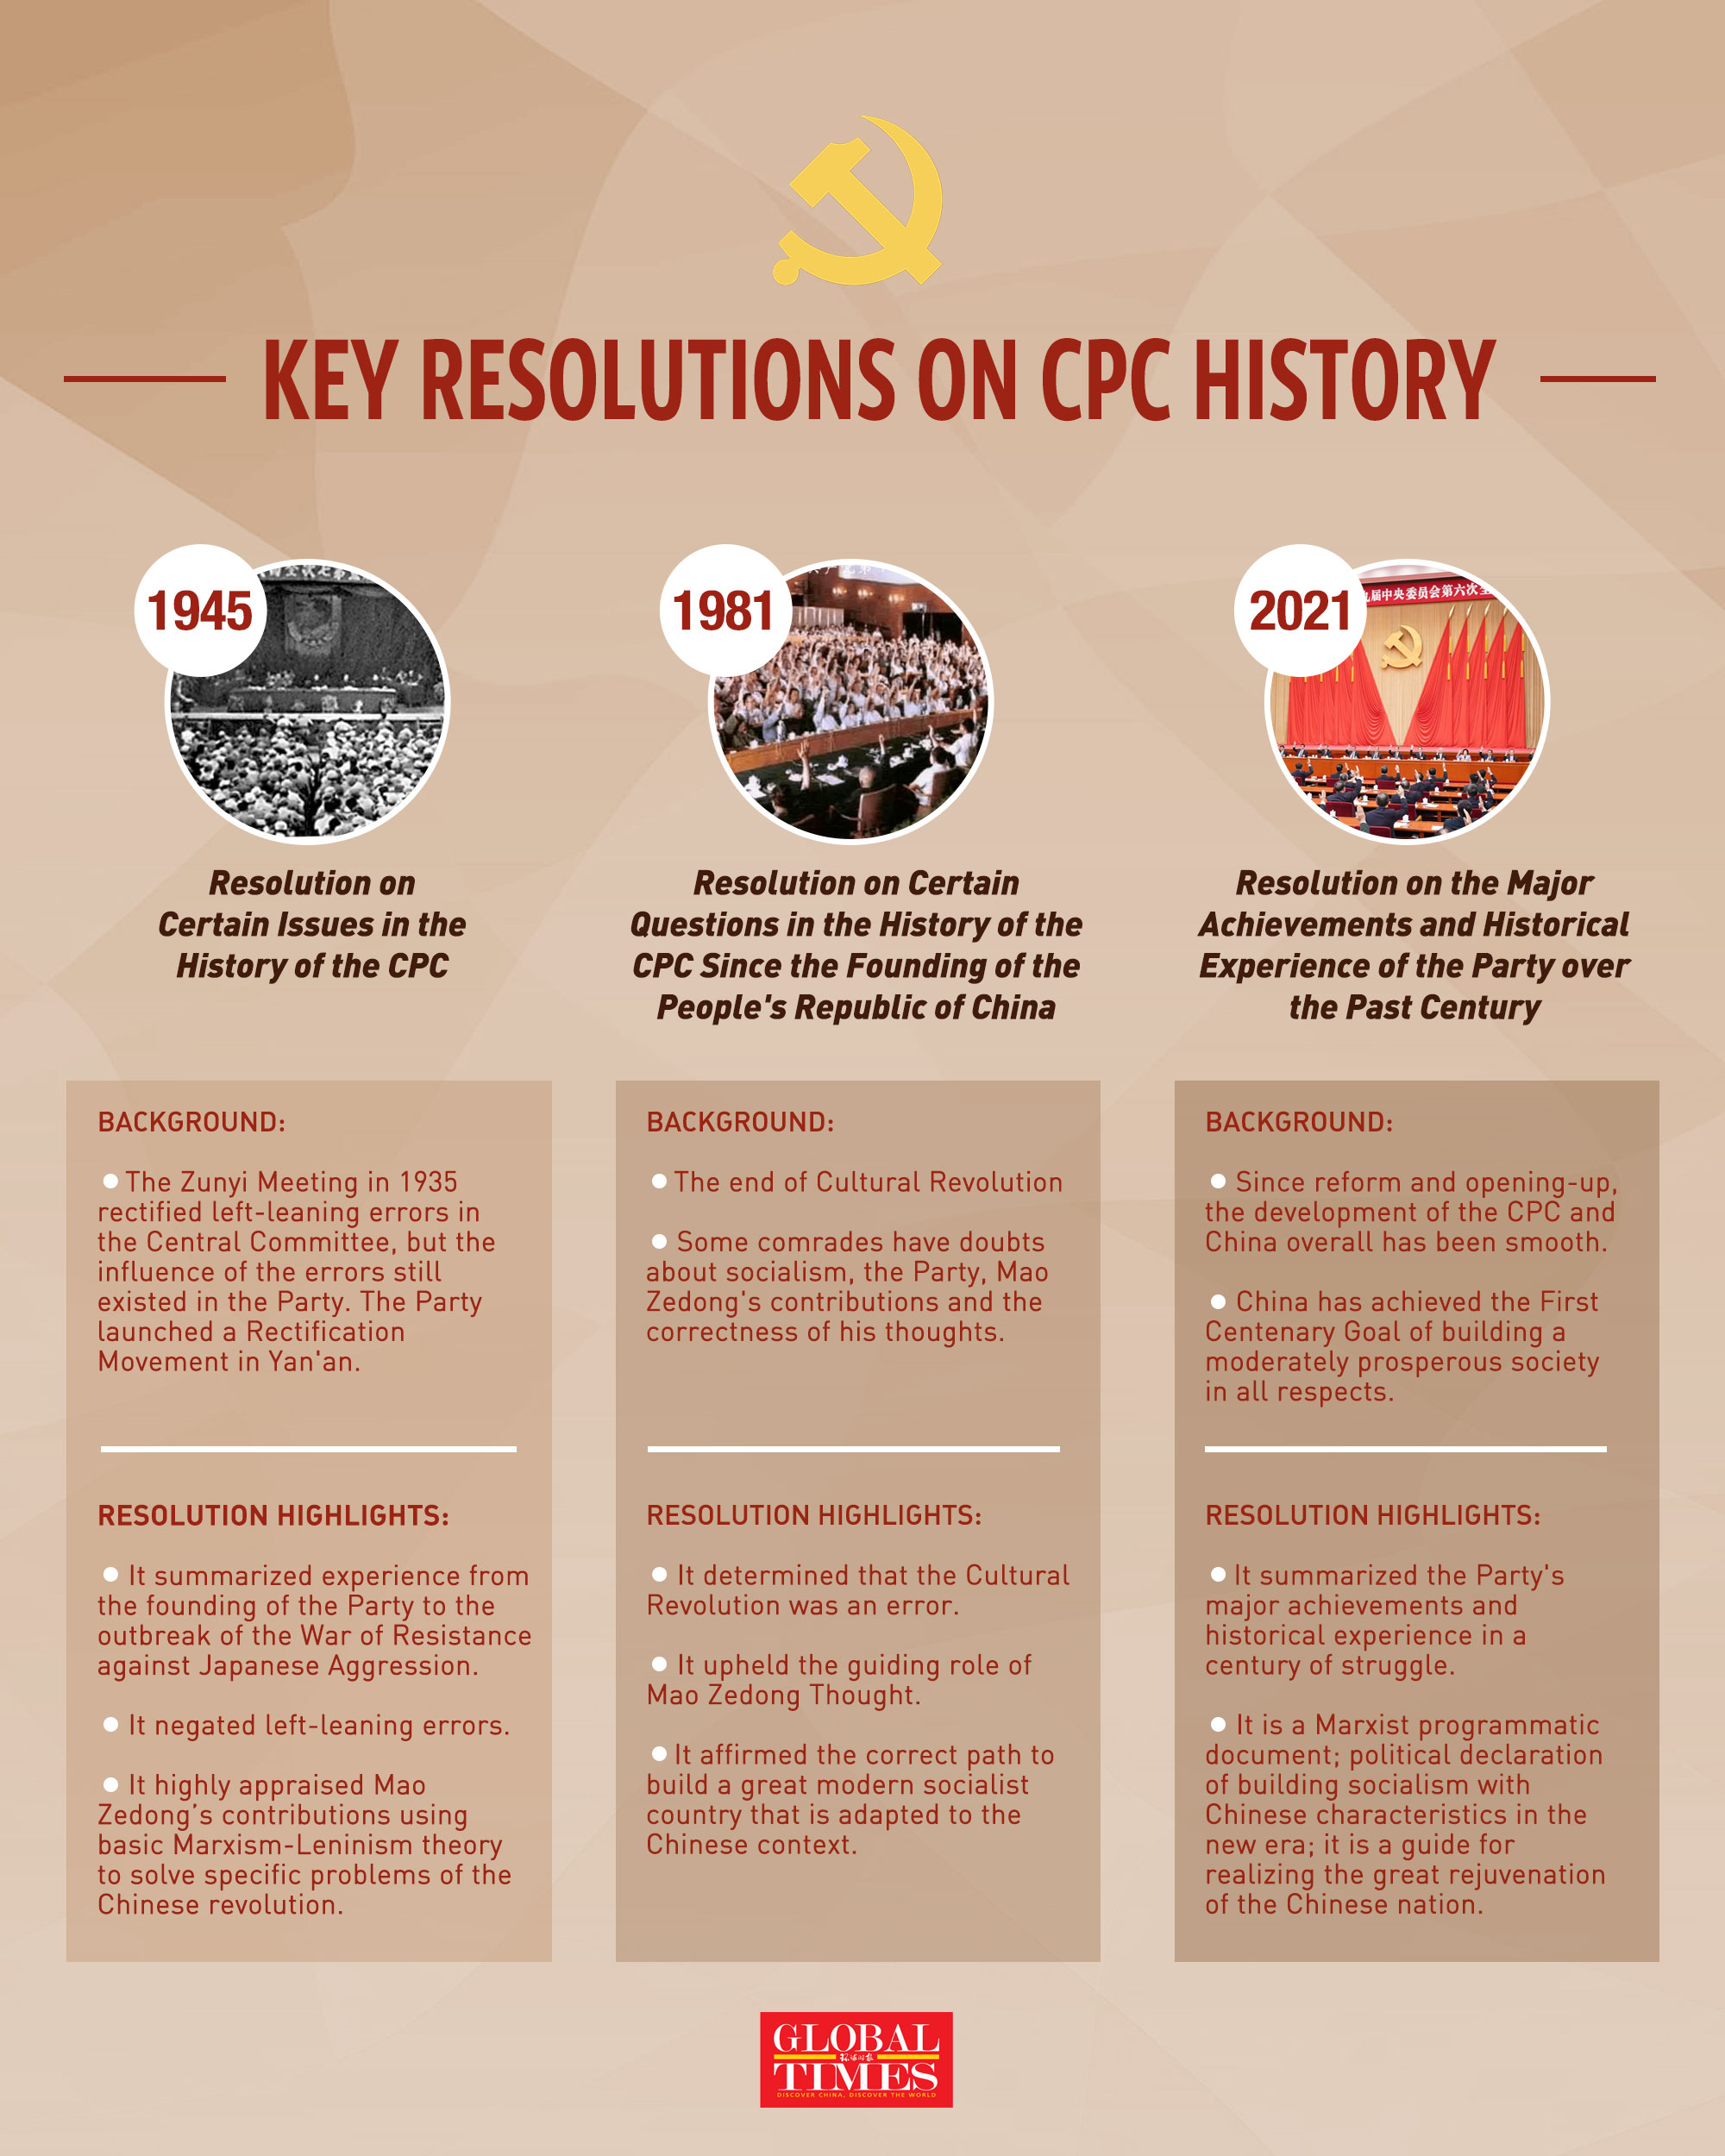 In the CPC's history, two resolutions focused on studying historical questions like the Cultural Revolution. The 3rd landmark resolution, adopted at Sixth Plenary Session of the 19th CPC Central Committee, summarizes the Party's achievements and experience over the past century. Graphic: GT